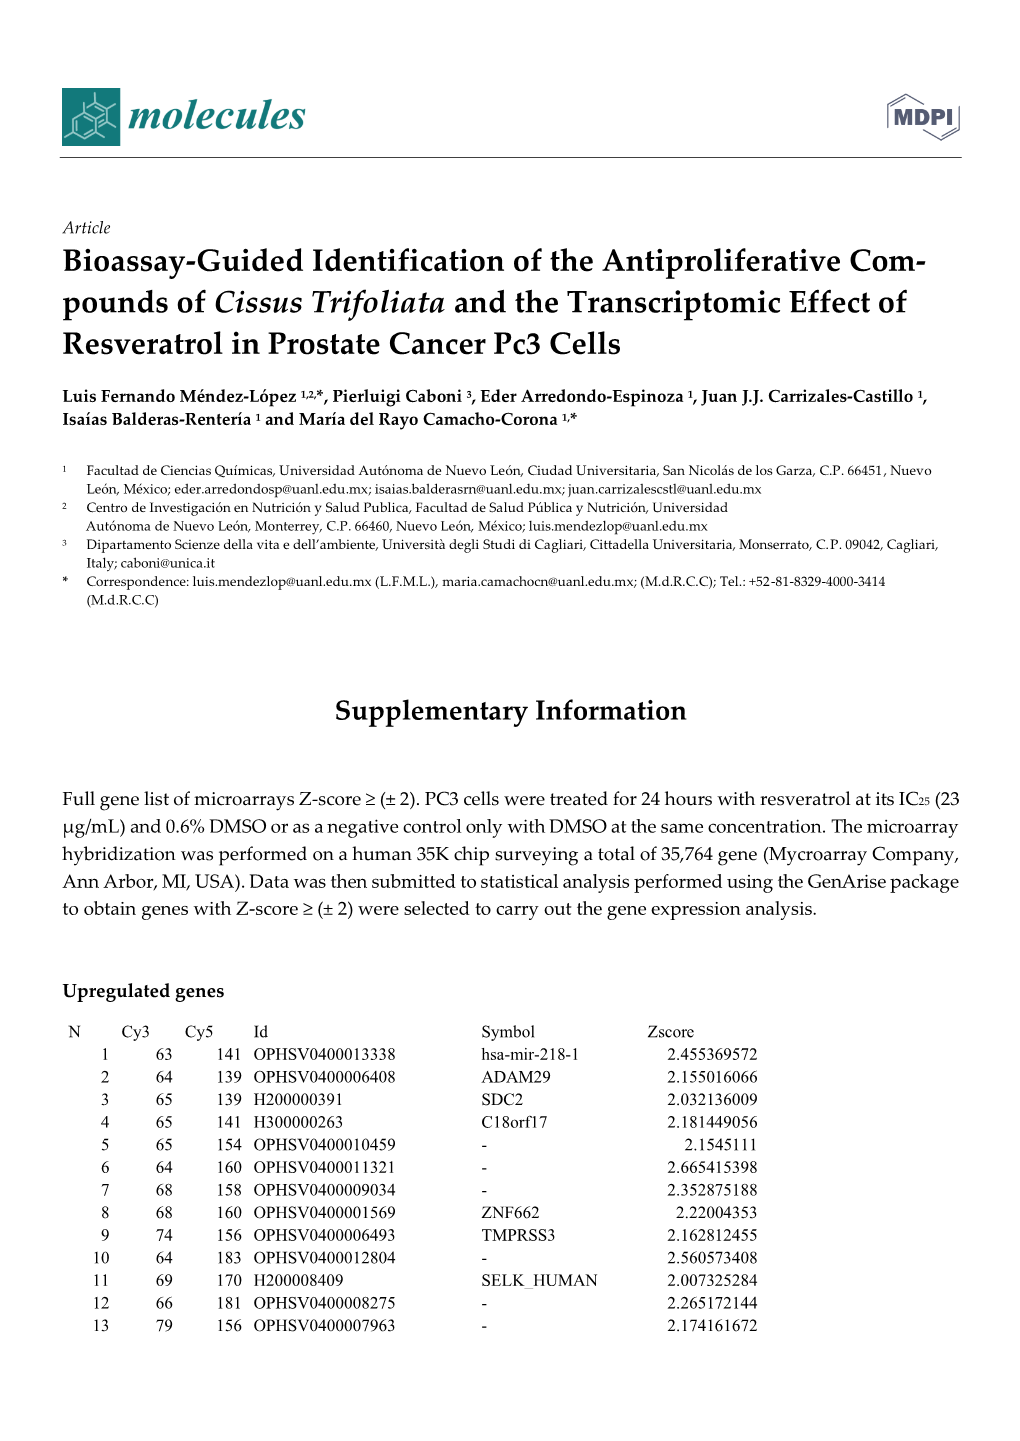 Bioassay-Guided Identification of the Antiproliferative Com- Pounds of Cissus Trifoliata and the Transcriptomic Effect of Resveratrol in Prostate Cancer Pc3 Cells